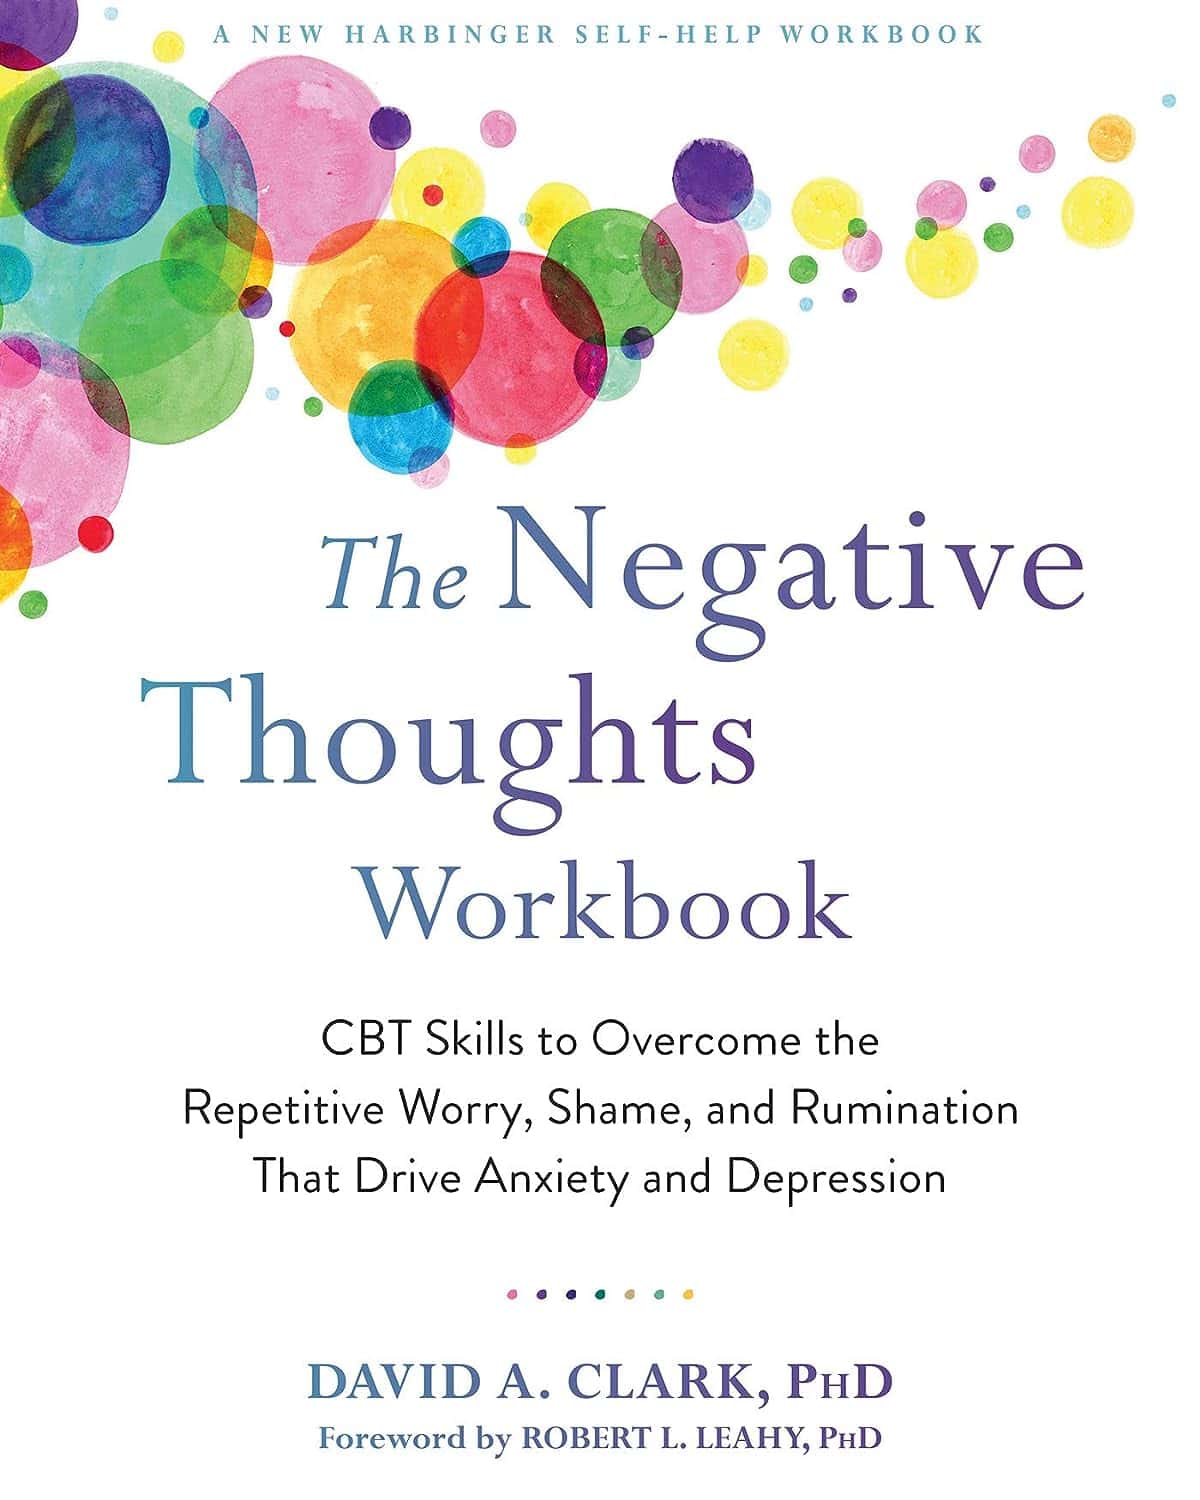 New Harbinger Publications The Negative Thoughts Workbook CBT Skills to Overcome the Repetitive Worry, Shame and Rumination That Drive Anxiety and Depression